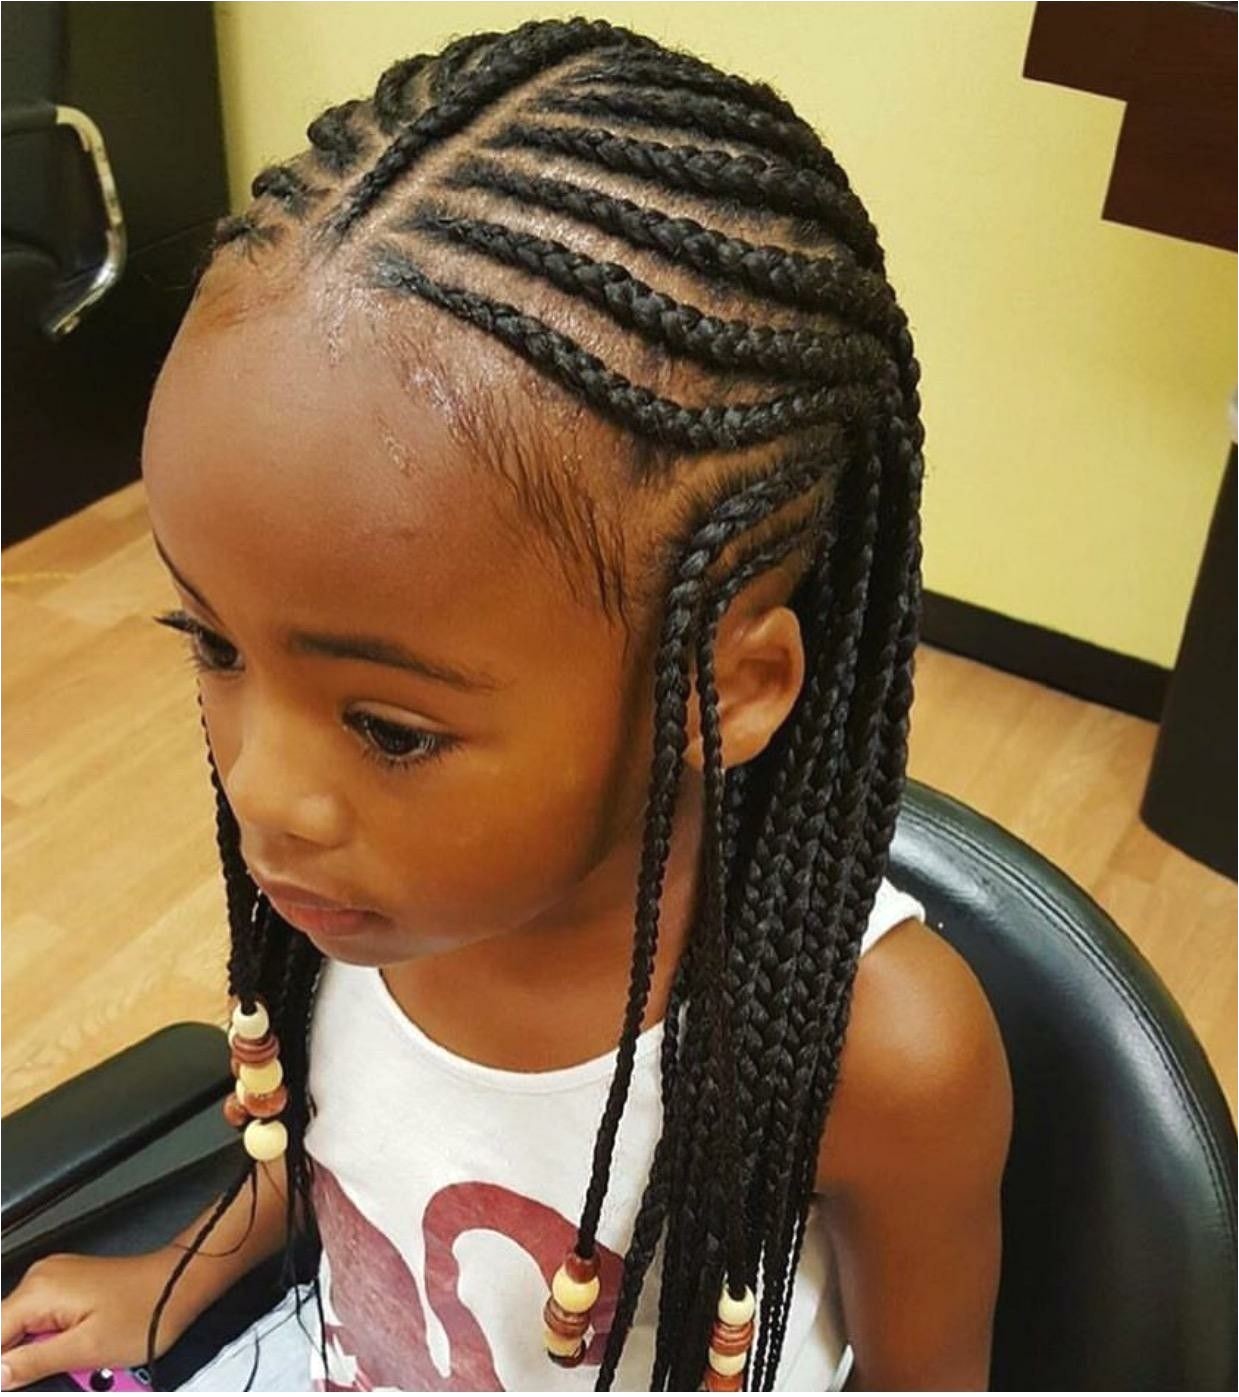 9 Year Old Black Girl Hairstyles ficial Lee Hairstyles for Gg & Nayeli In 2018 Pinterest